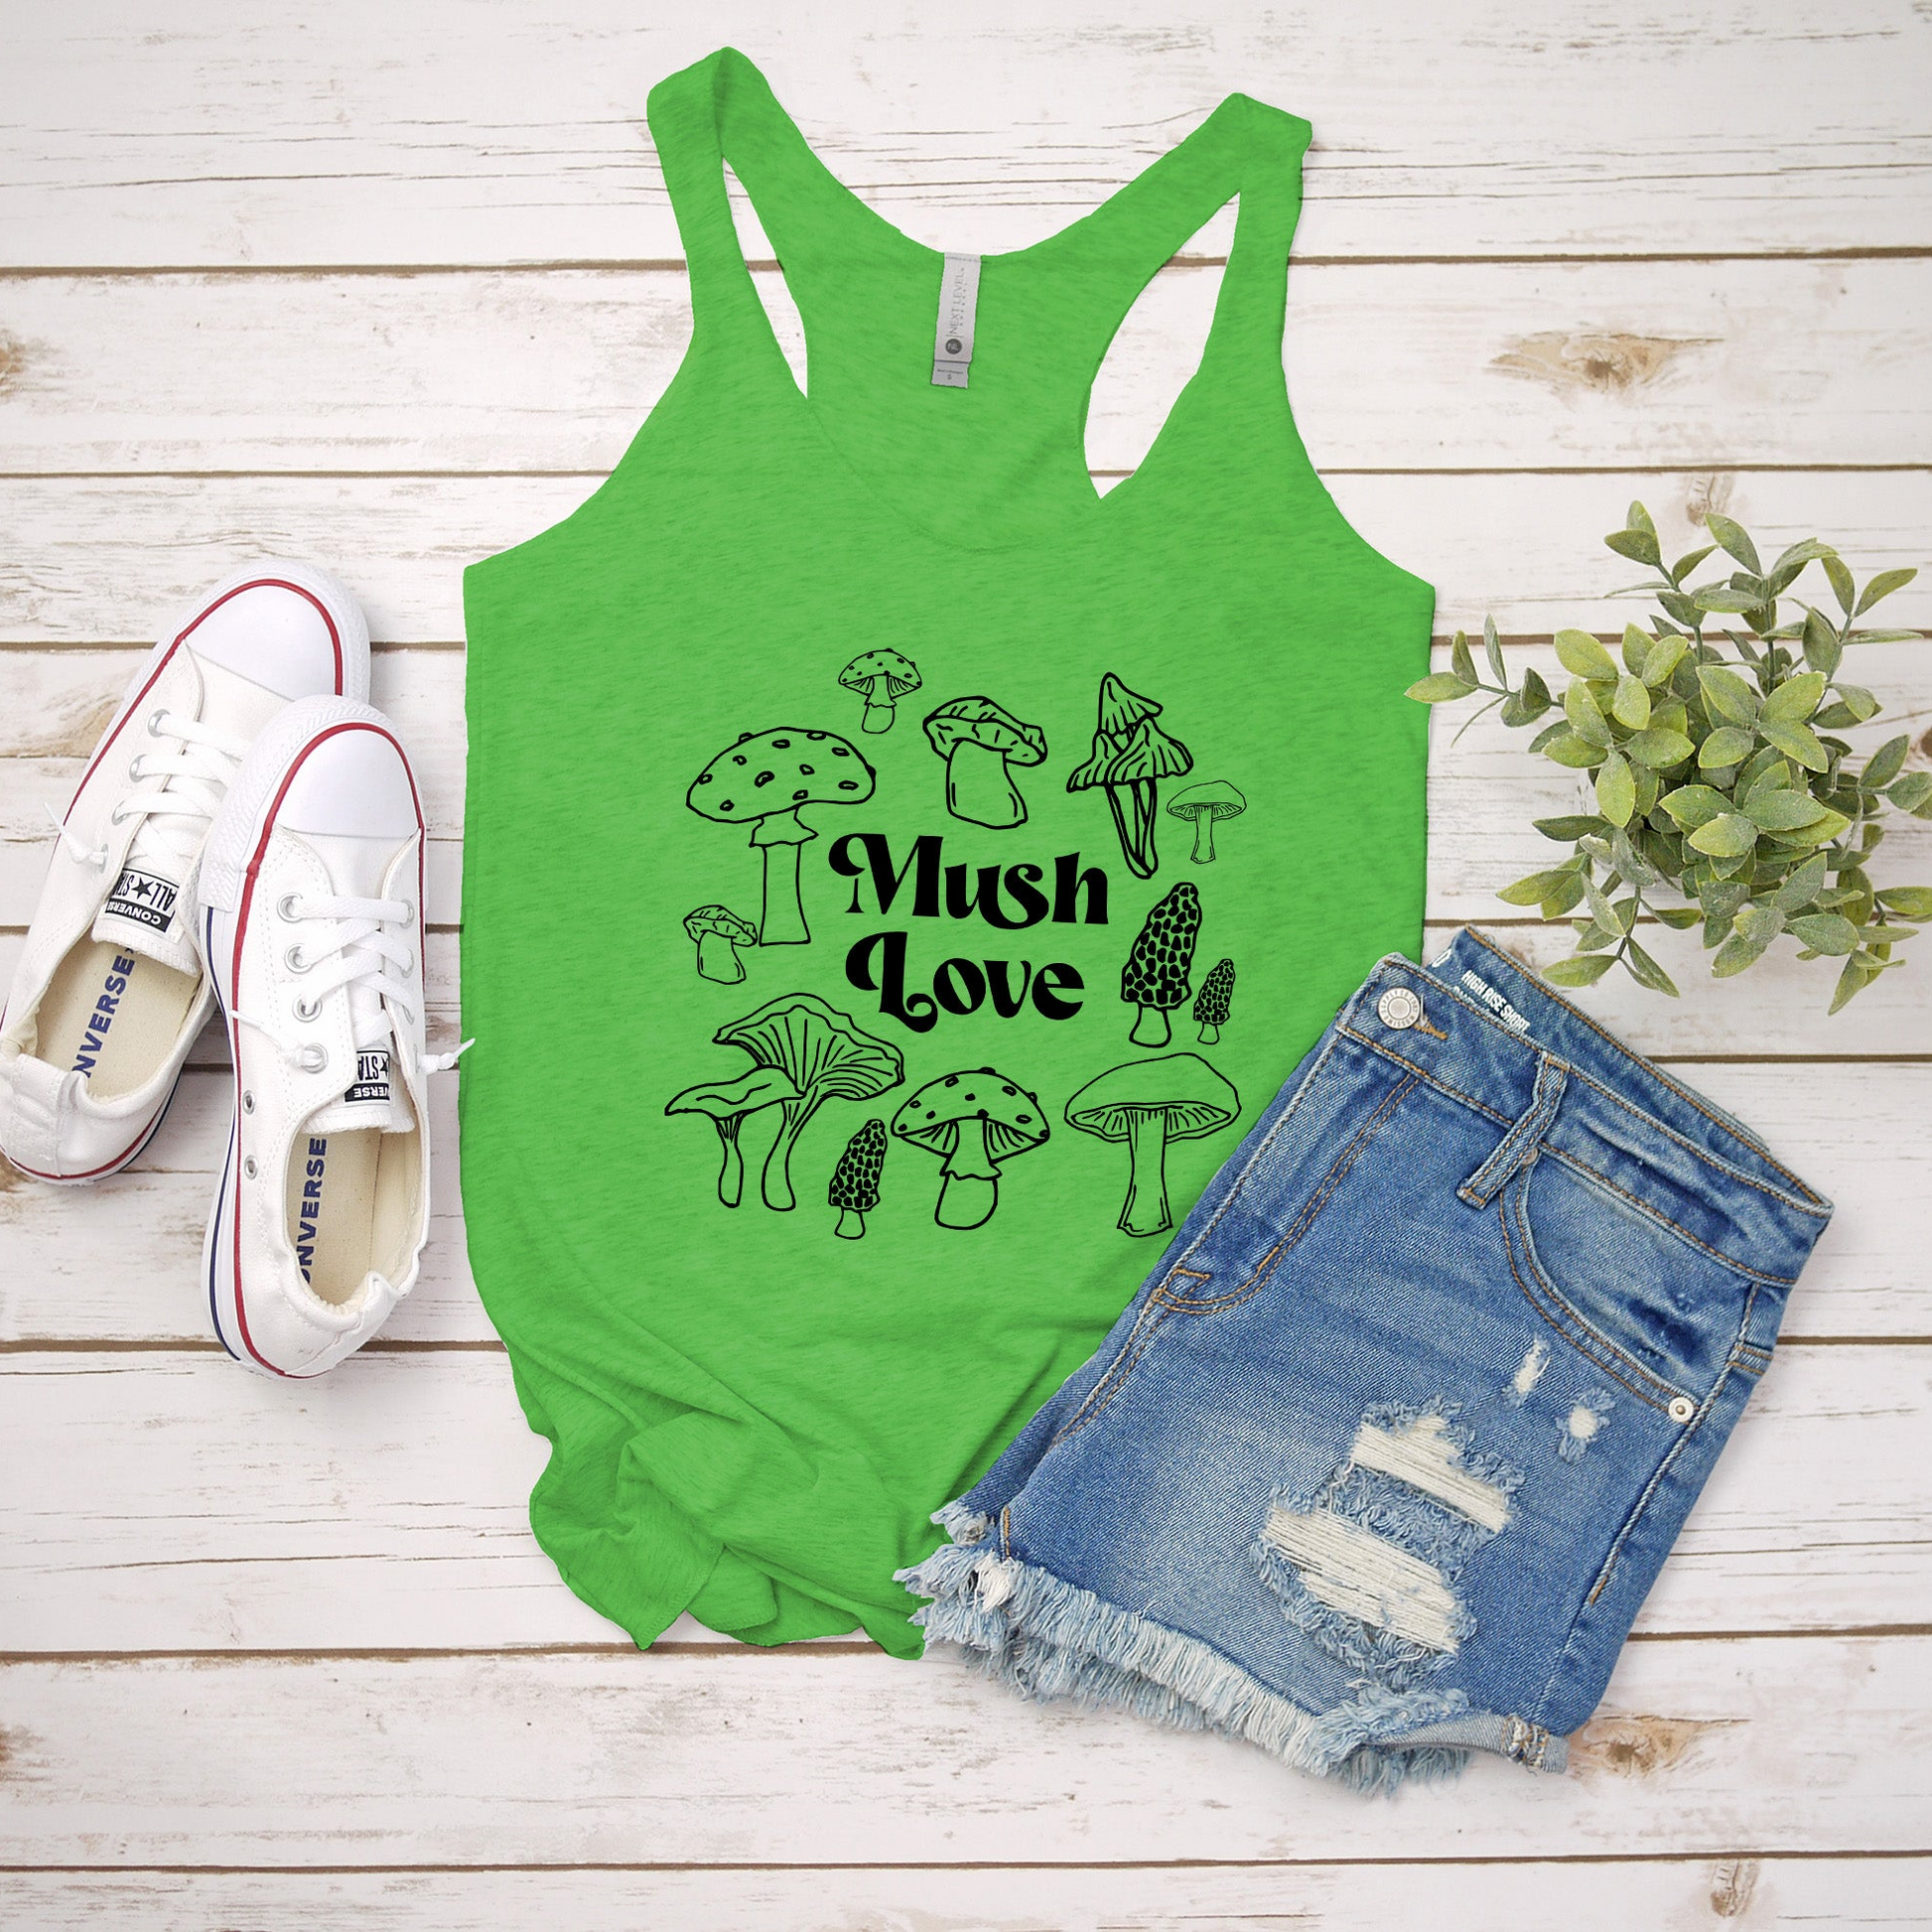 a green tank top with mushrooms on it